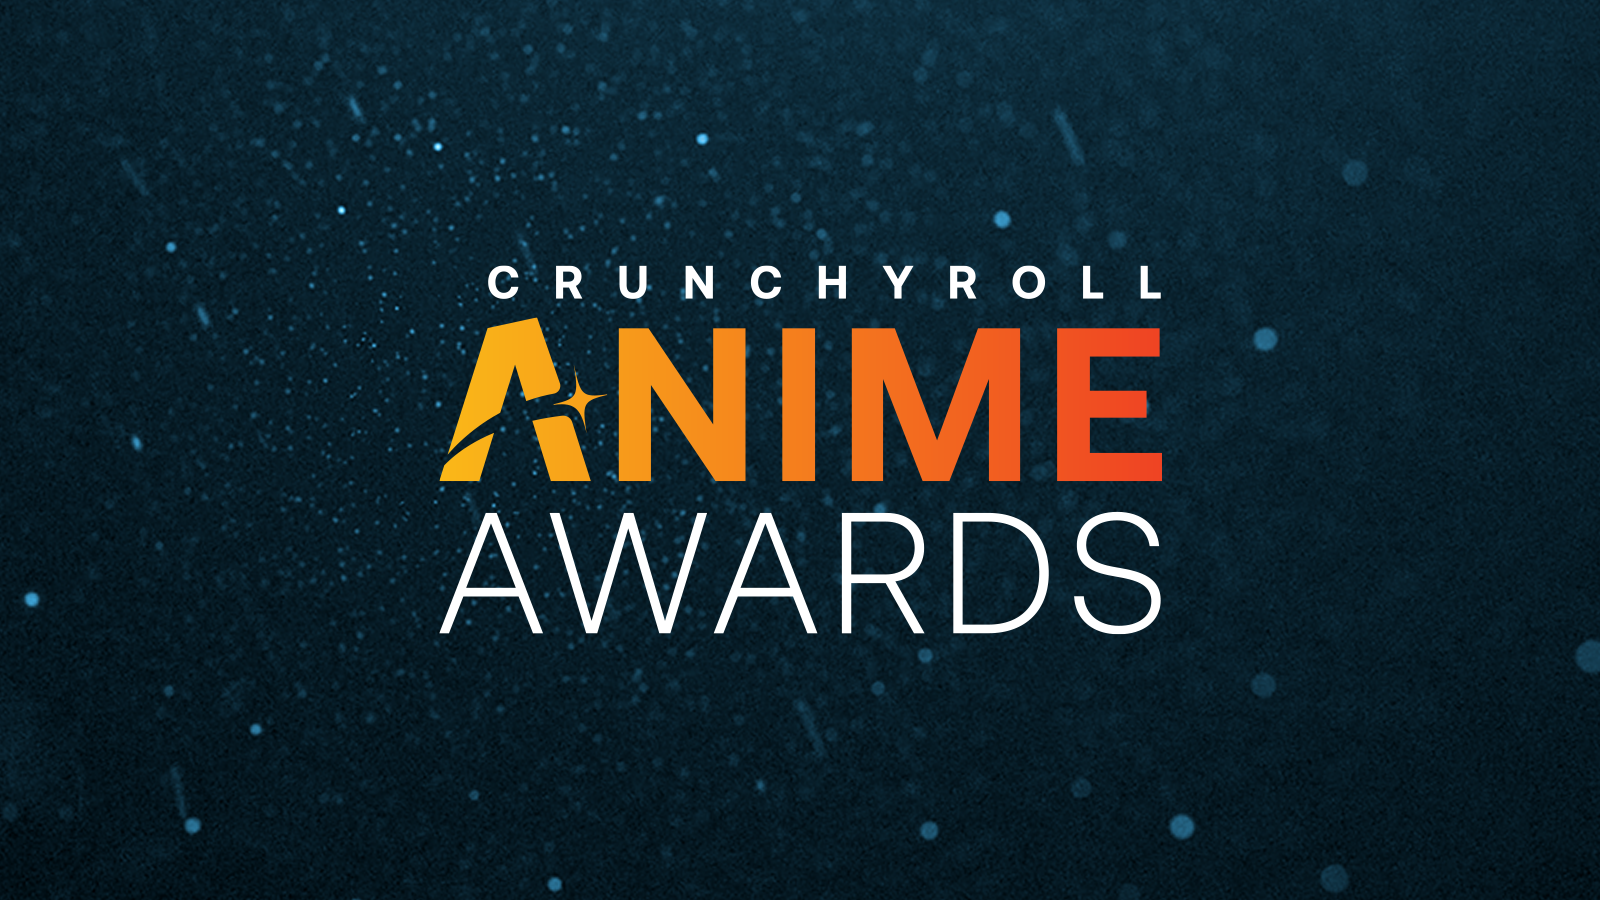 Crunchyroll Announces End Of Free Anime Simulcast Broadcasts As